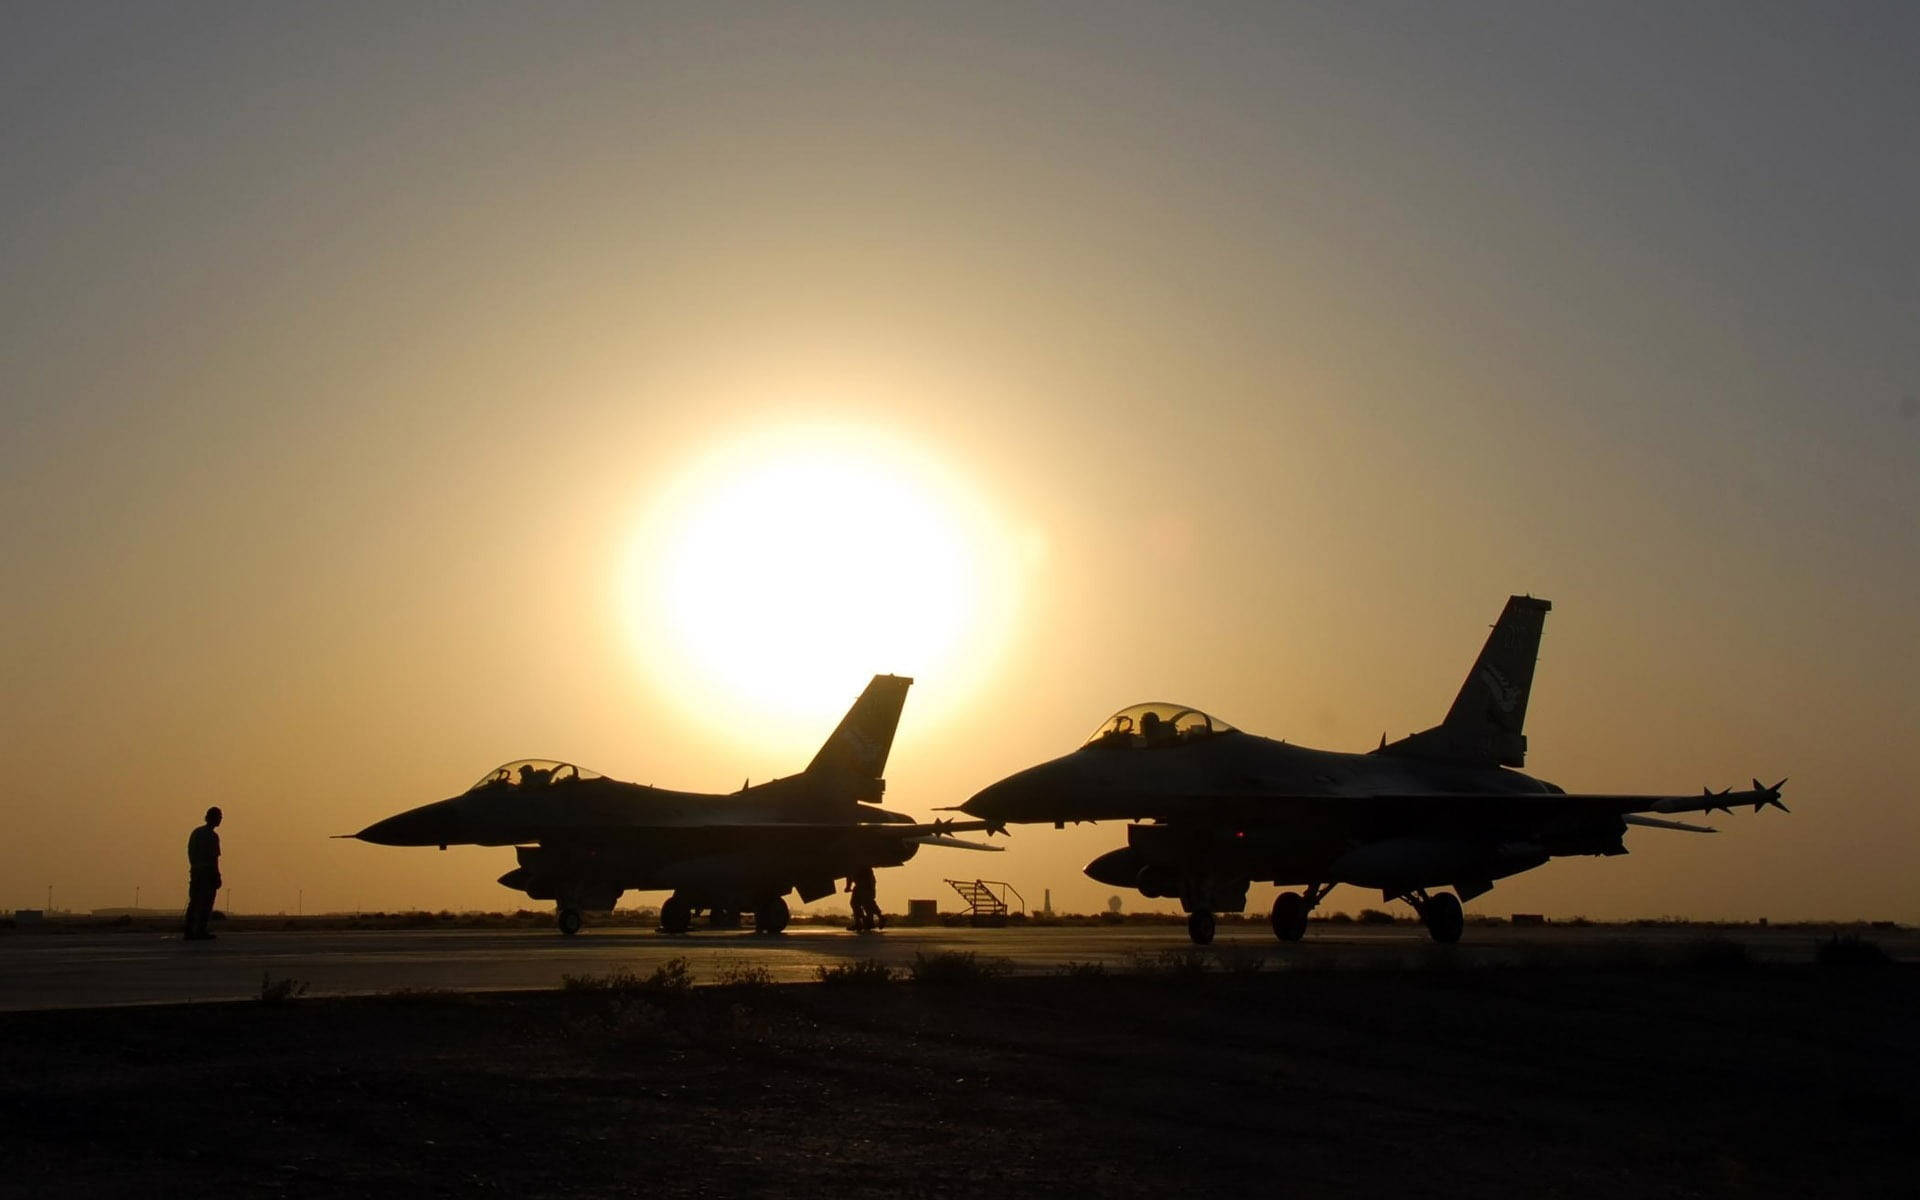 Spectacular Sunset Behind Falcon Military Aircraft